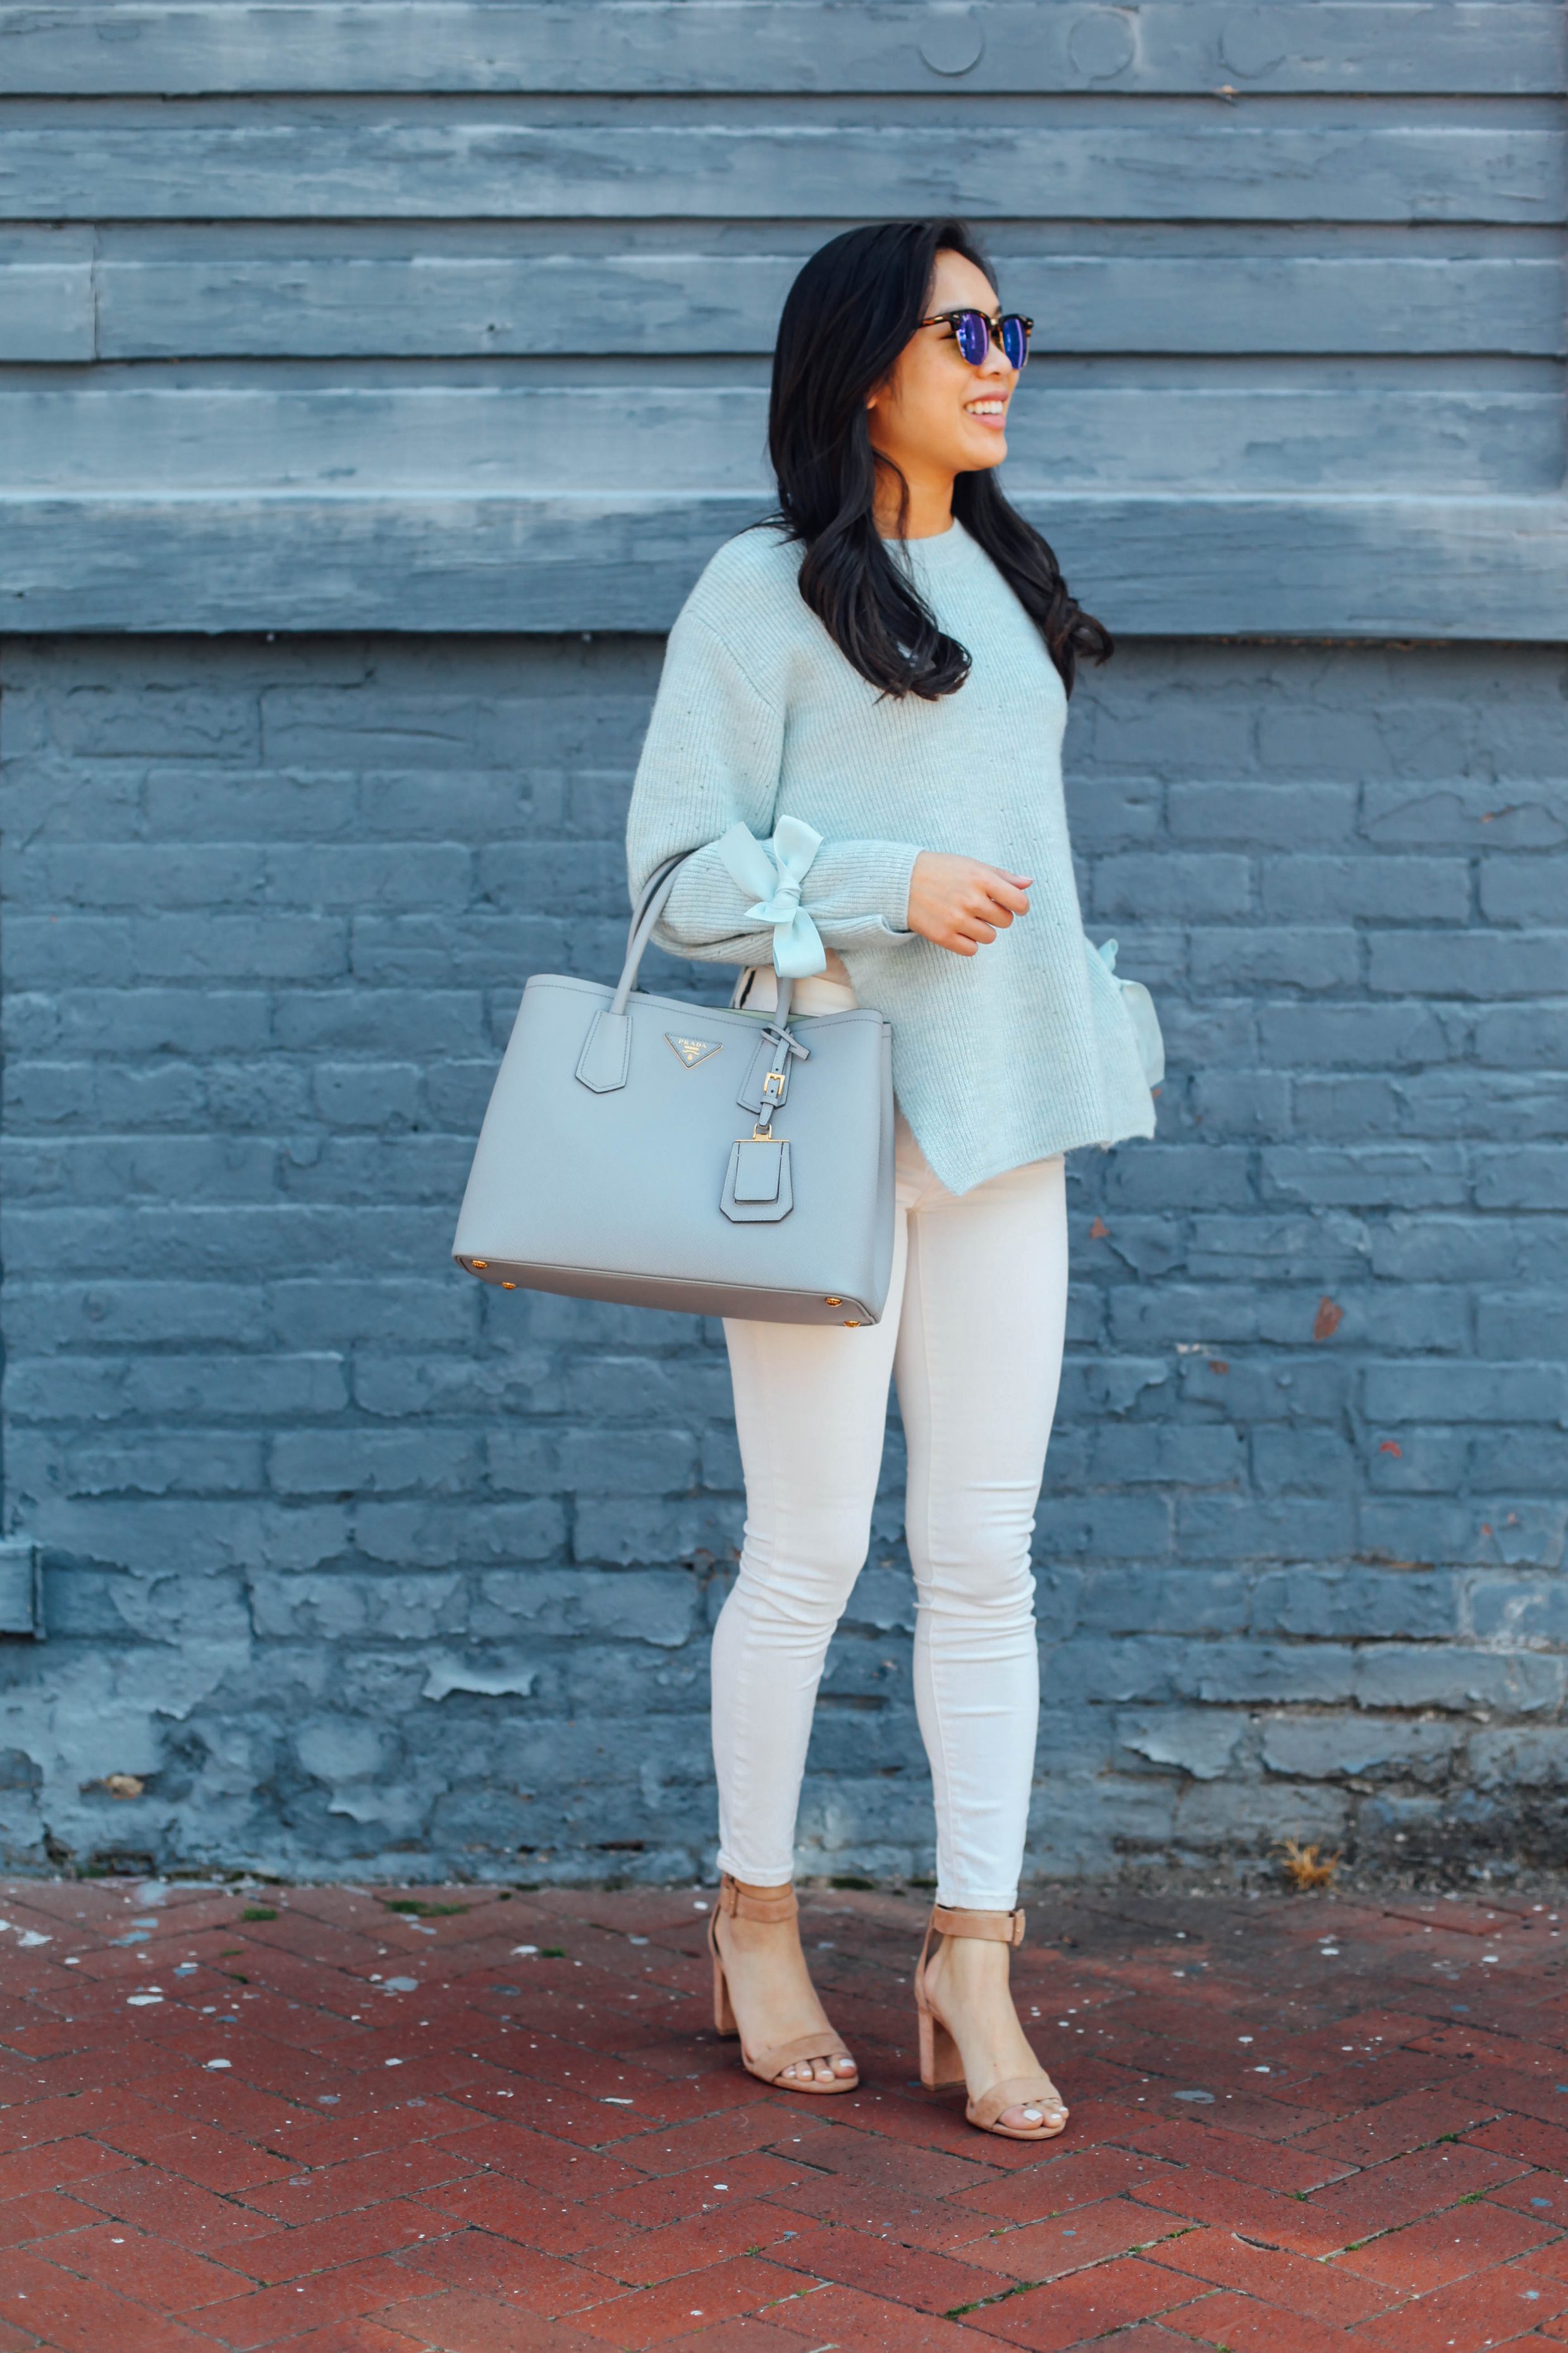 Blogger Hoang-Kim wears a Topshop bow sleeve sweater with suede sandals